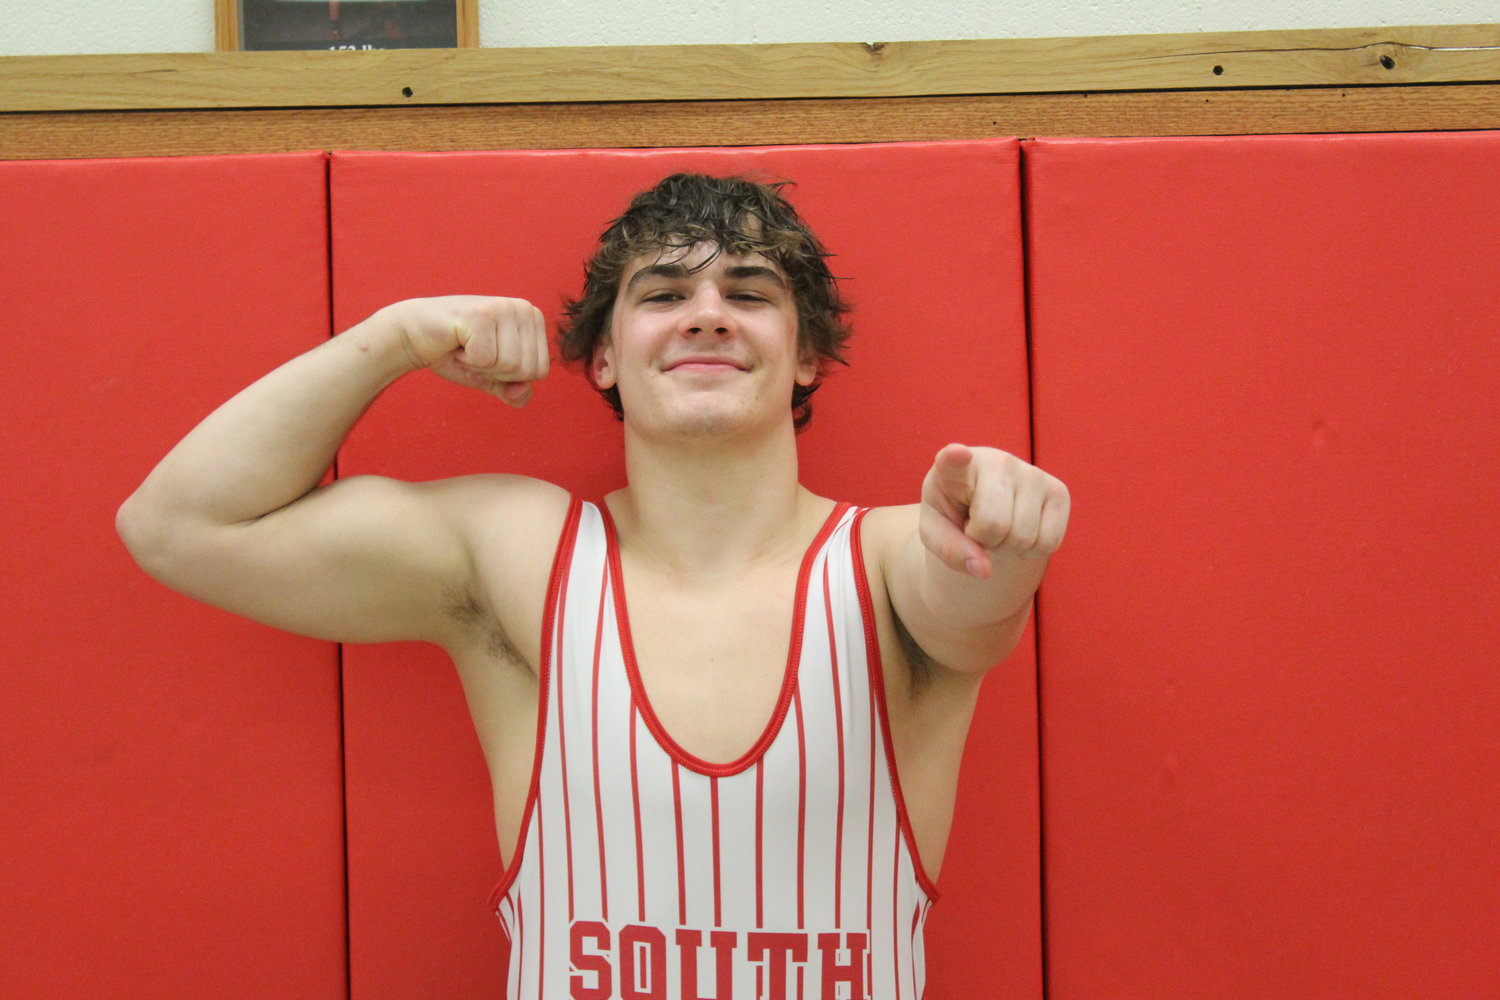 Southmont's Wyatt Woodall went 35-2 this past season on his way to making his first state finals appearance. His dominance on the mat earns him the title of the 2022-23 Journal Review Wrestler of the Year.